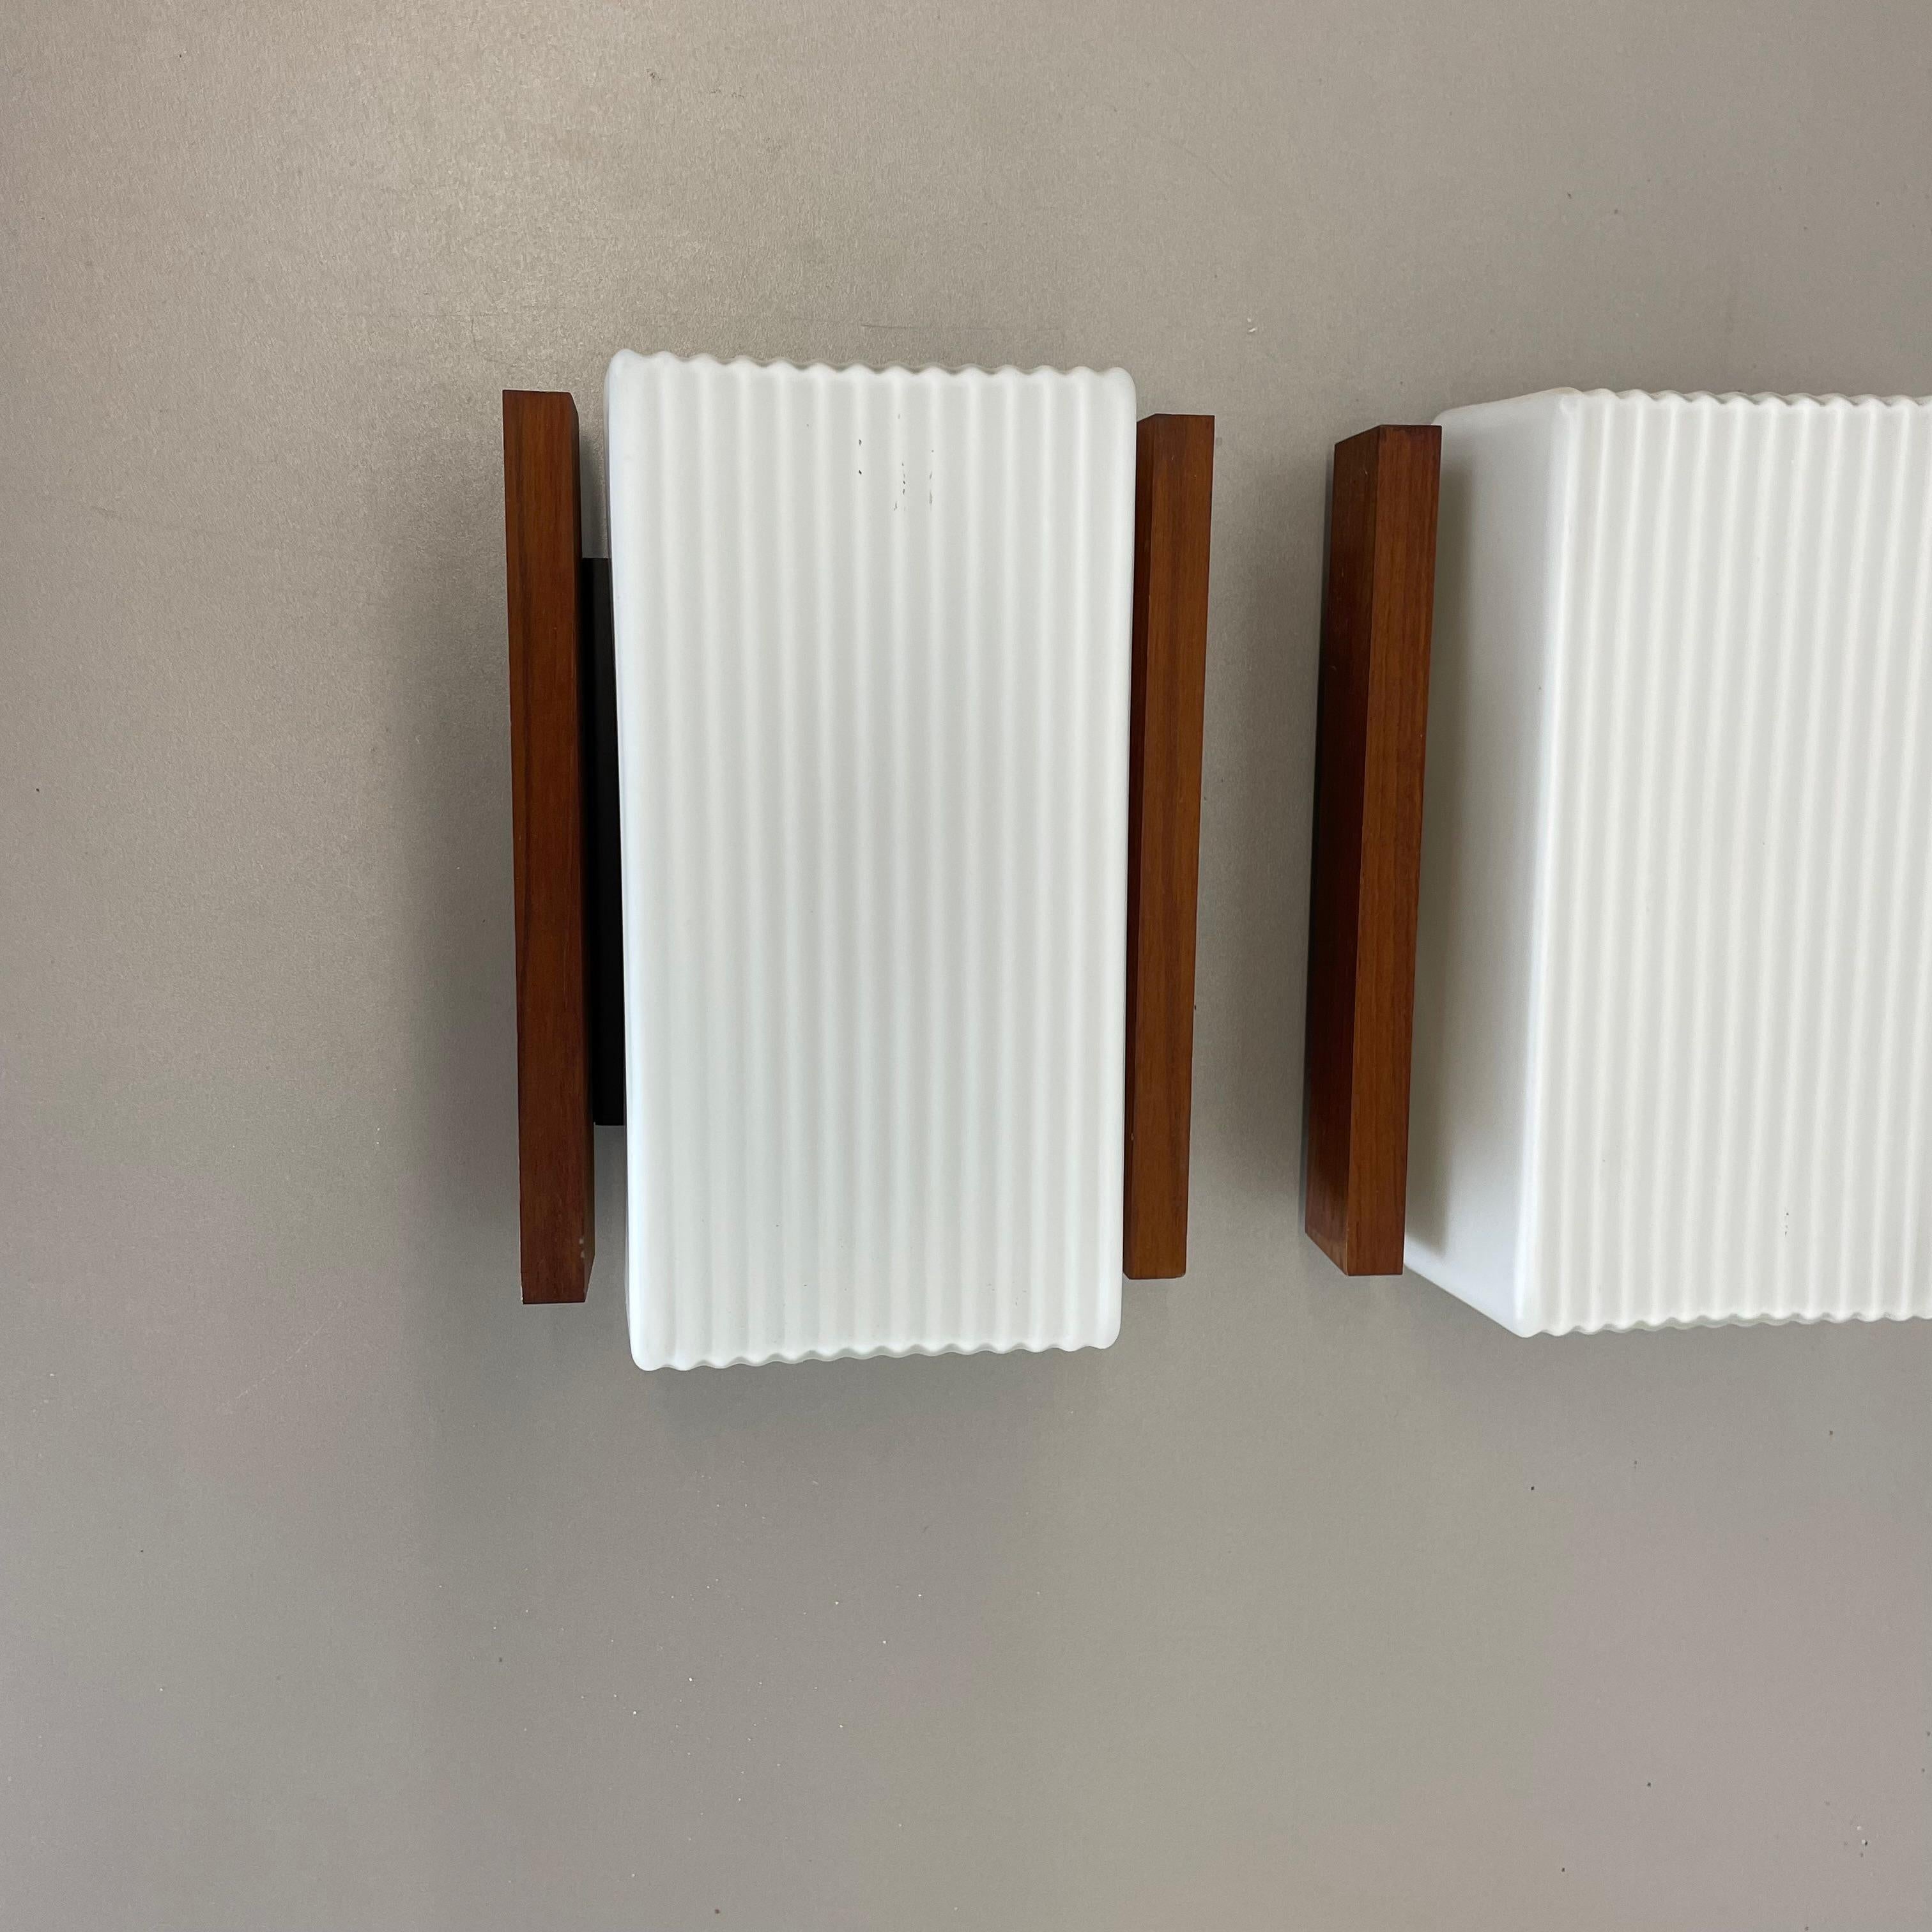 Set of 2 satin white glass and teak Wall Lights by BEGA Lights, Germany 1960s In Good Condition For Sale In Kirchlengern, DE